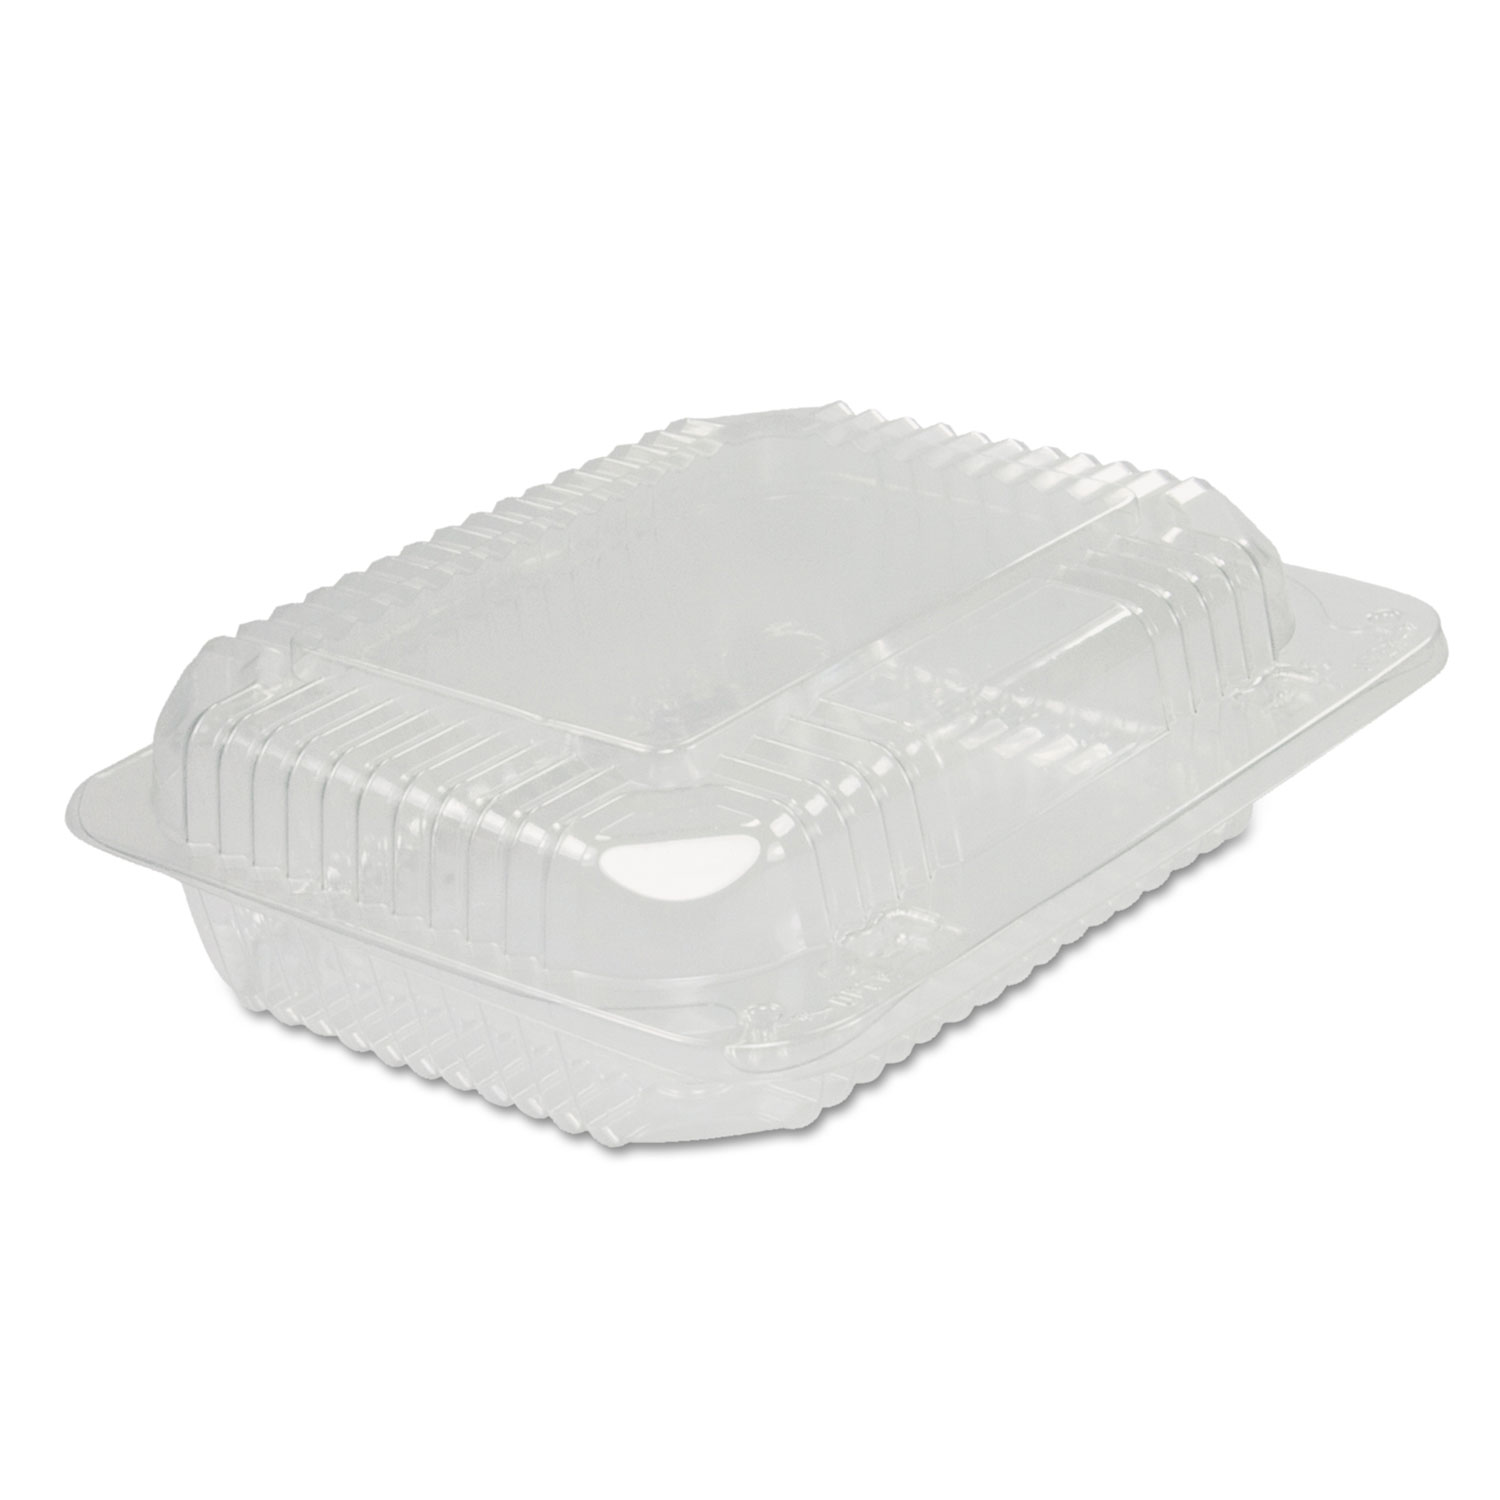  Dart C26UT1 StayLock Clear Hinged Lid Containers, Plastic, 6 x 2 1/10 x 7, 125/PK, 2/CT (DCCC26UT1) 